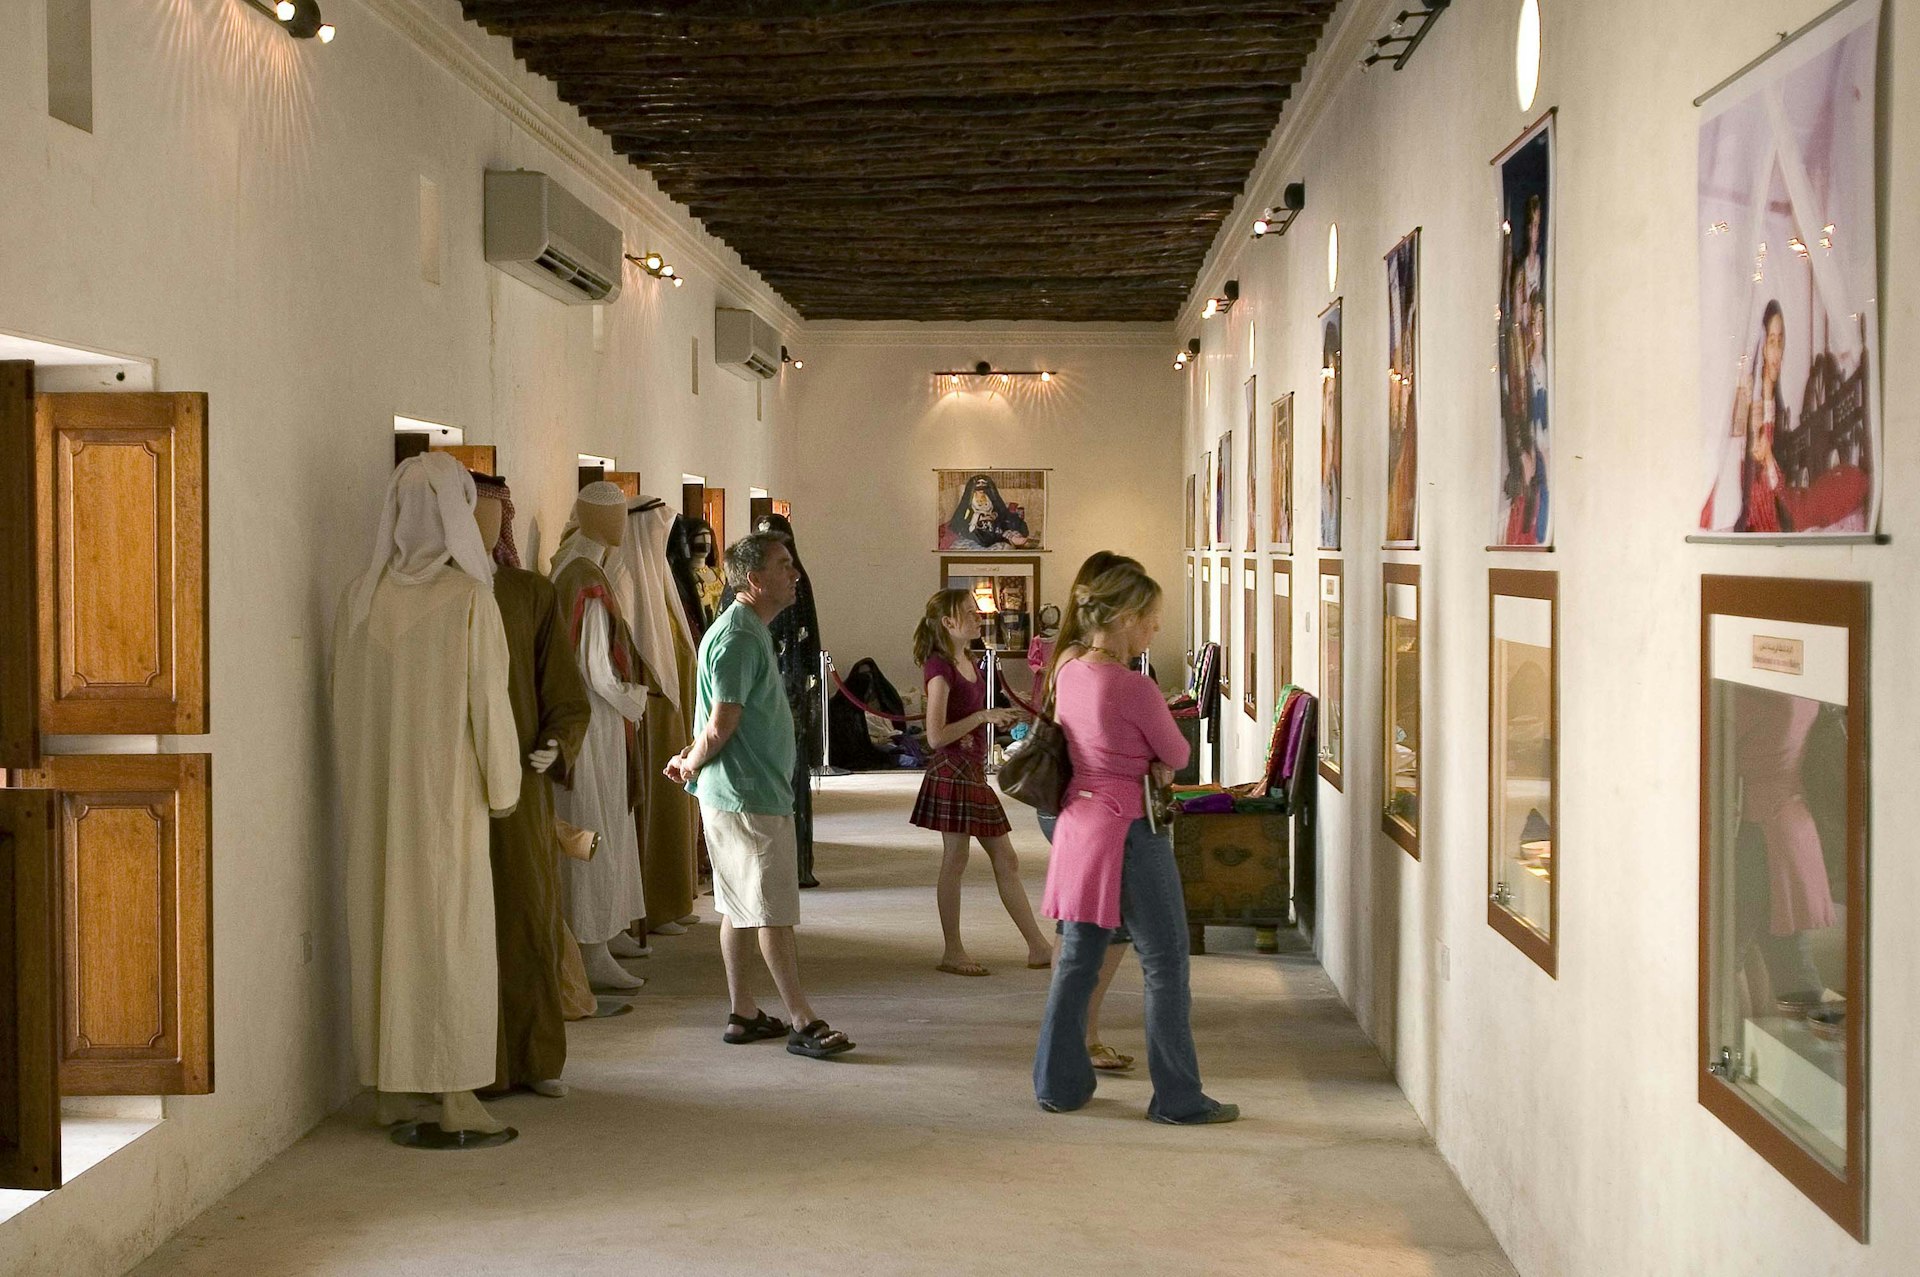 Features - Sharjah-Heritage-Museum3000-c9fa5e7913a4